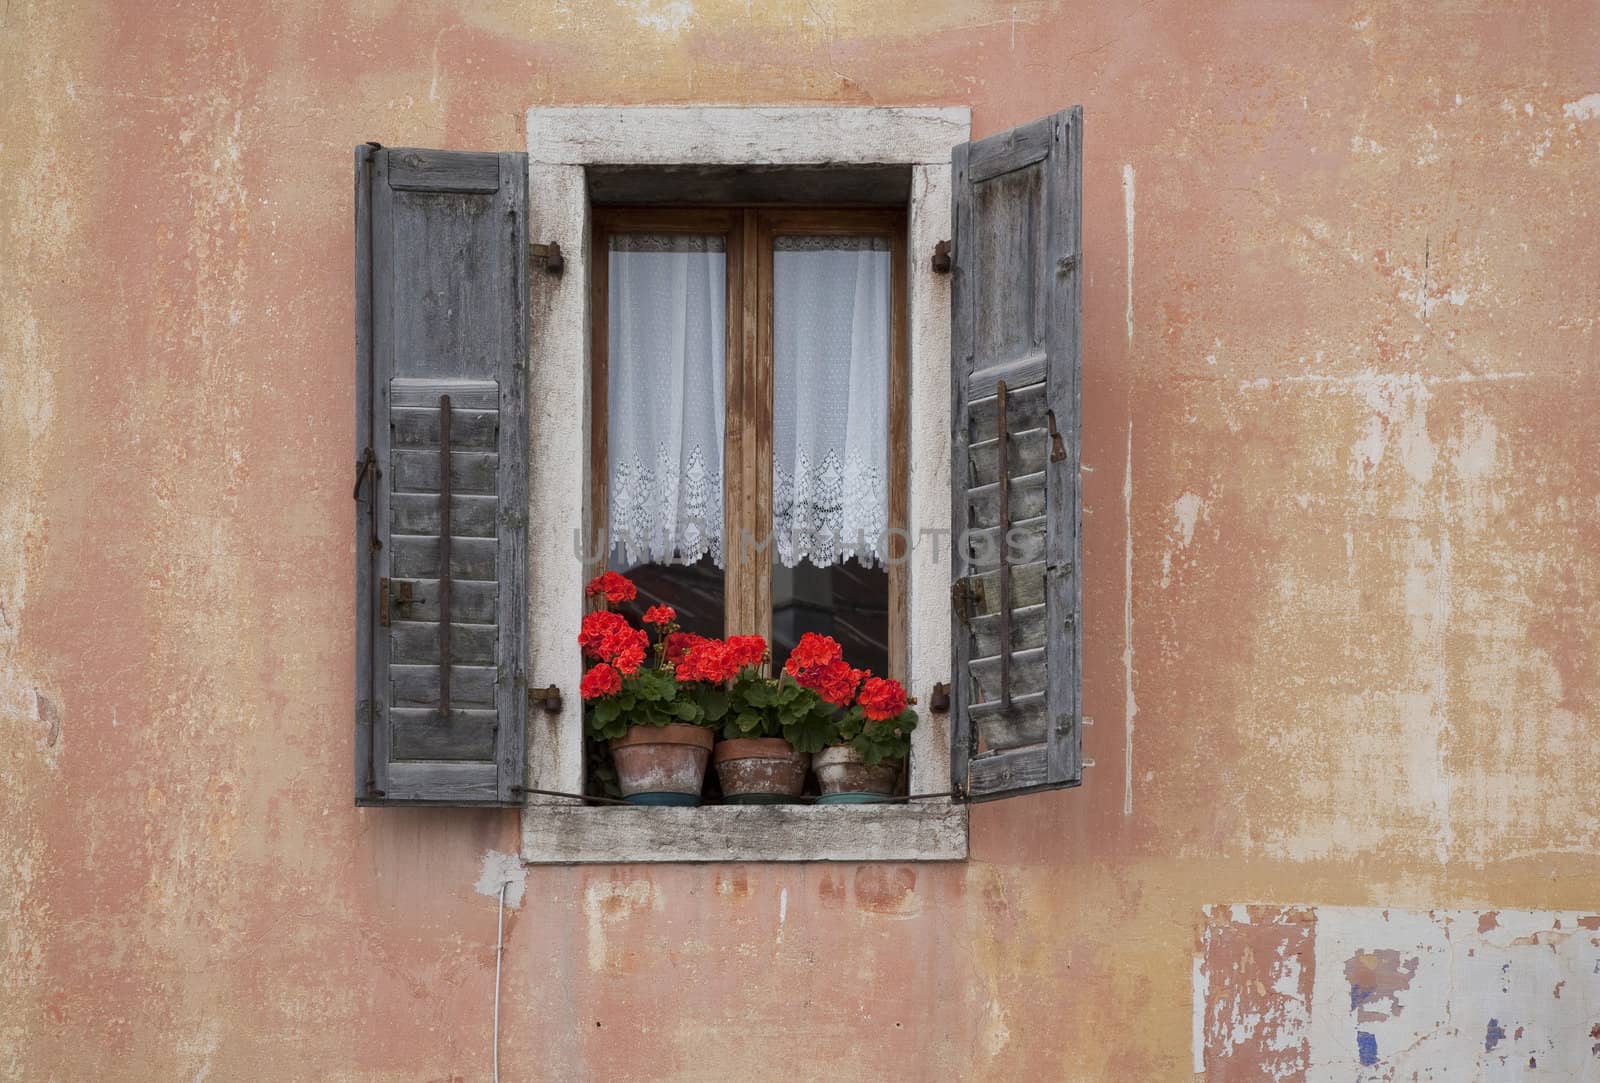 Window with nice red geranium and shutters South Tyrol, Italy.